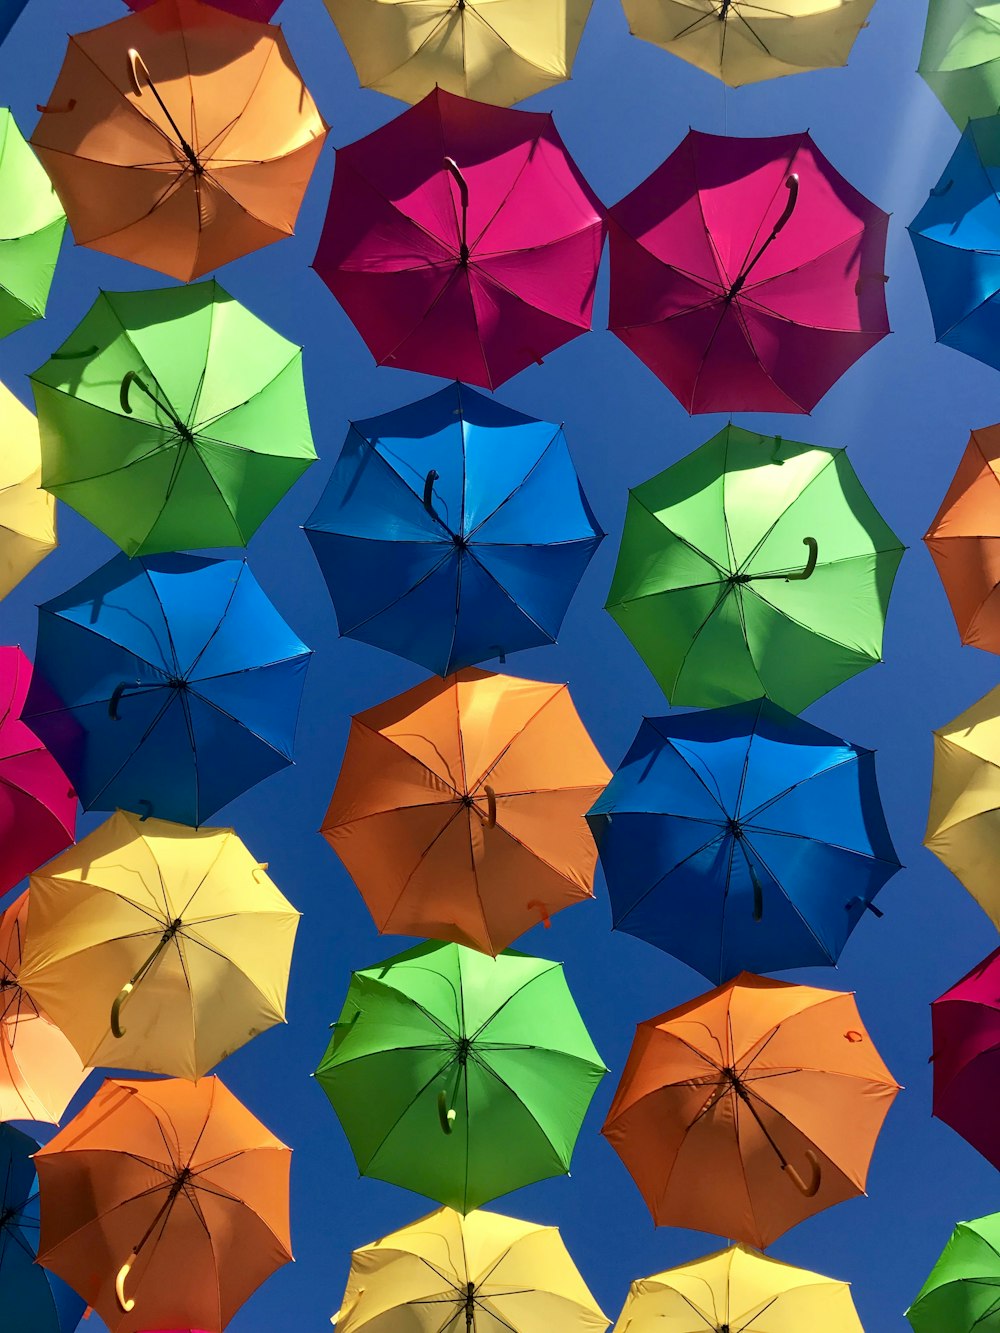 Colorful Umbrella Pictures | Download Free Images on Unsplash